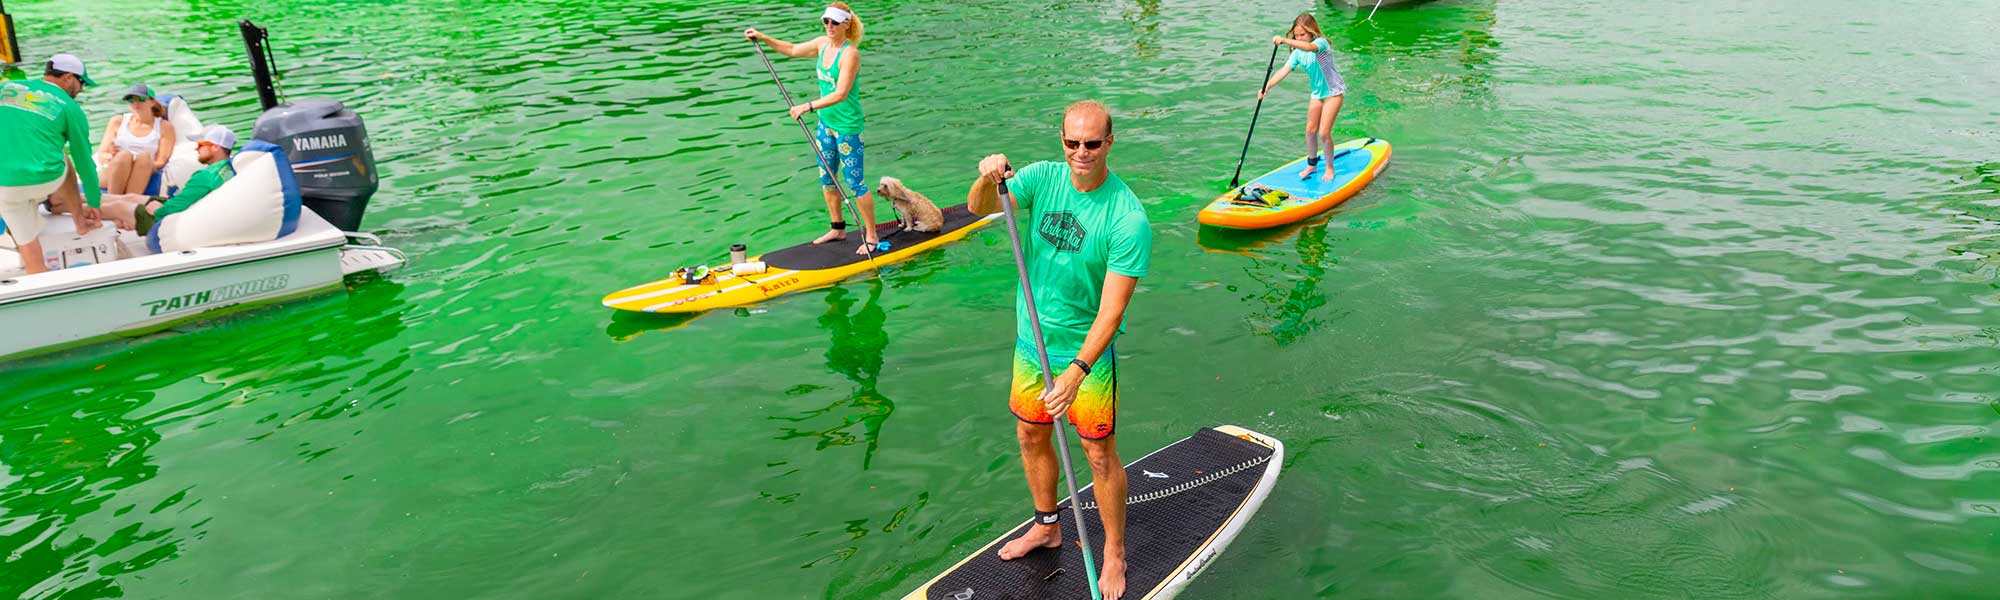 people on stand up paddle boards in the hillsborough river when it was dyed green for st. paddys day